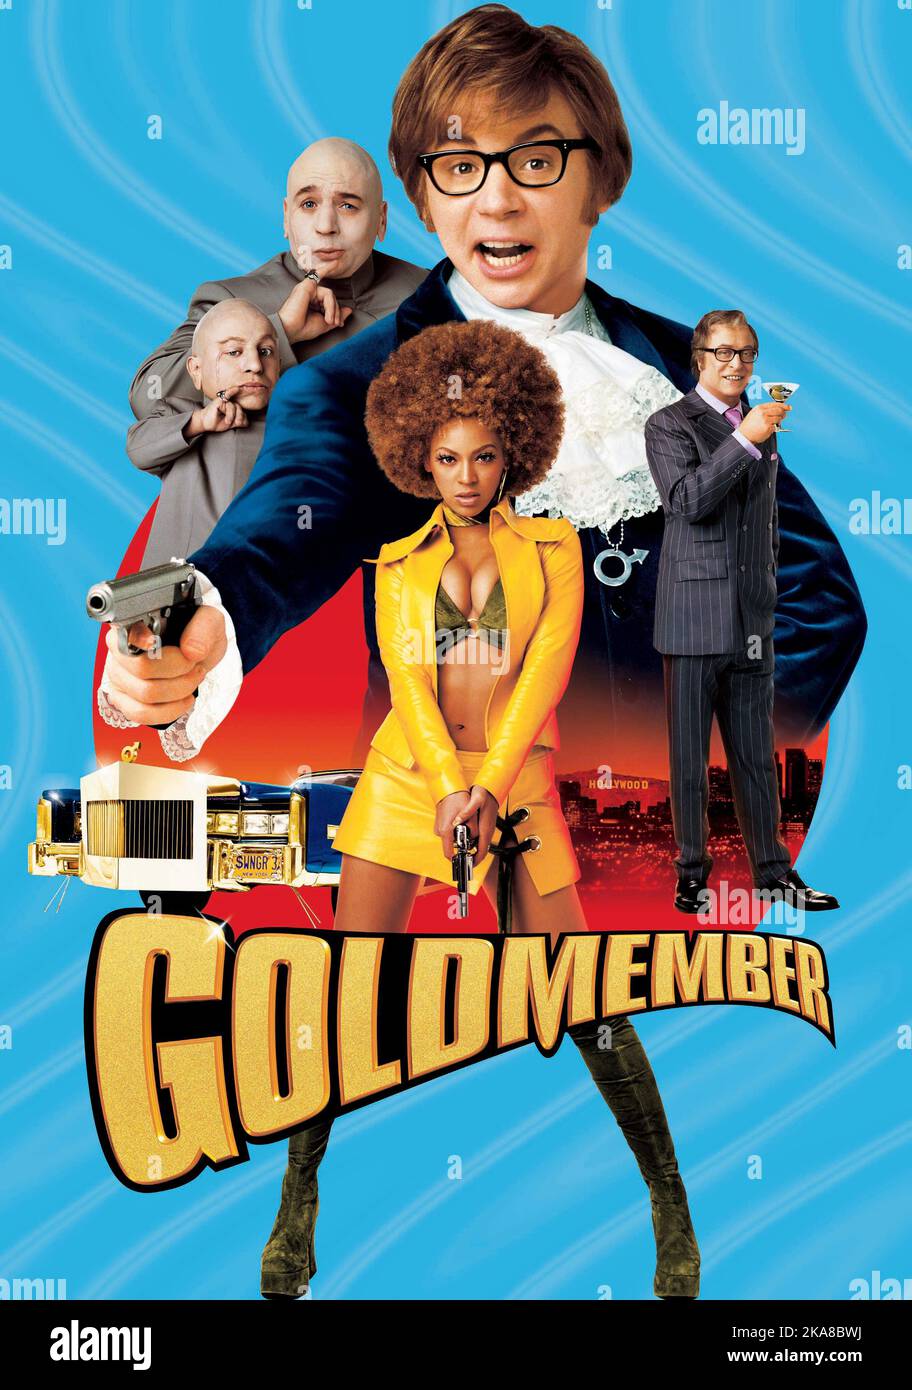 Austin Powers In Goldmember poster Goldmember Mike Myers Stock Photo